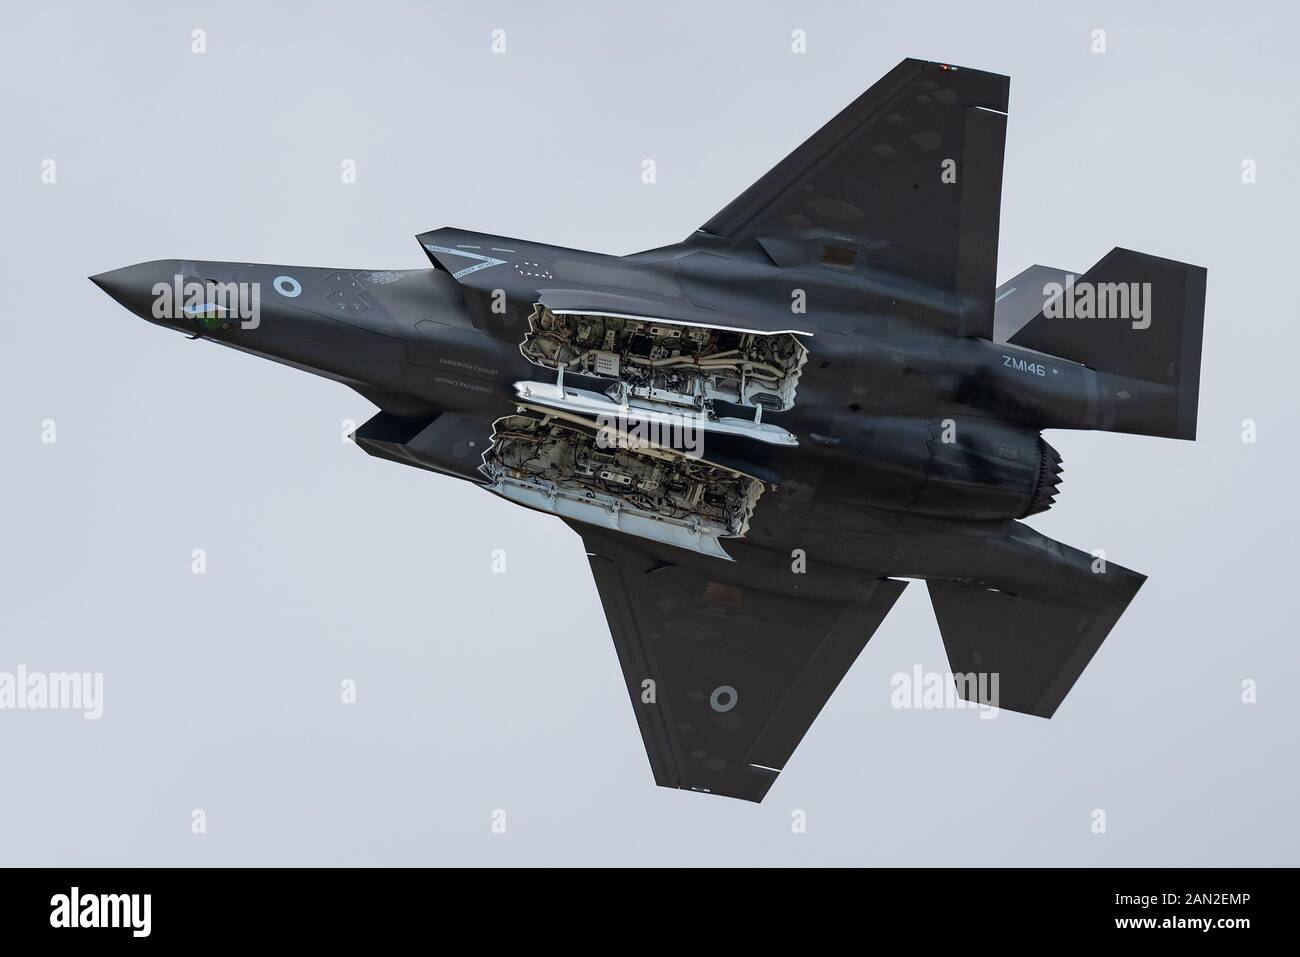 A Lockheed Martin F-35B Lightning II stealth fighter jet of the British Royal Air Force. Stock Photo